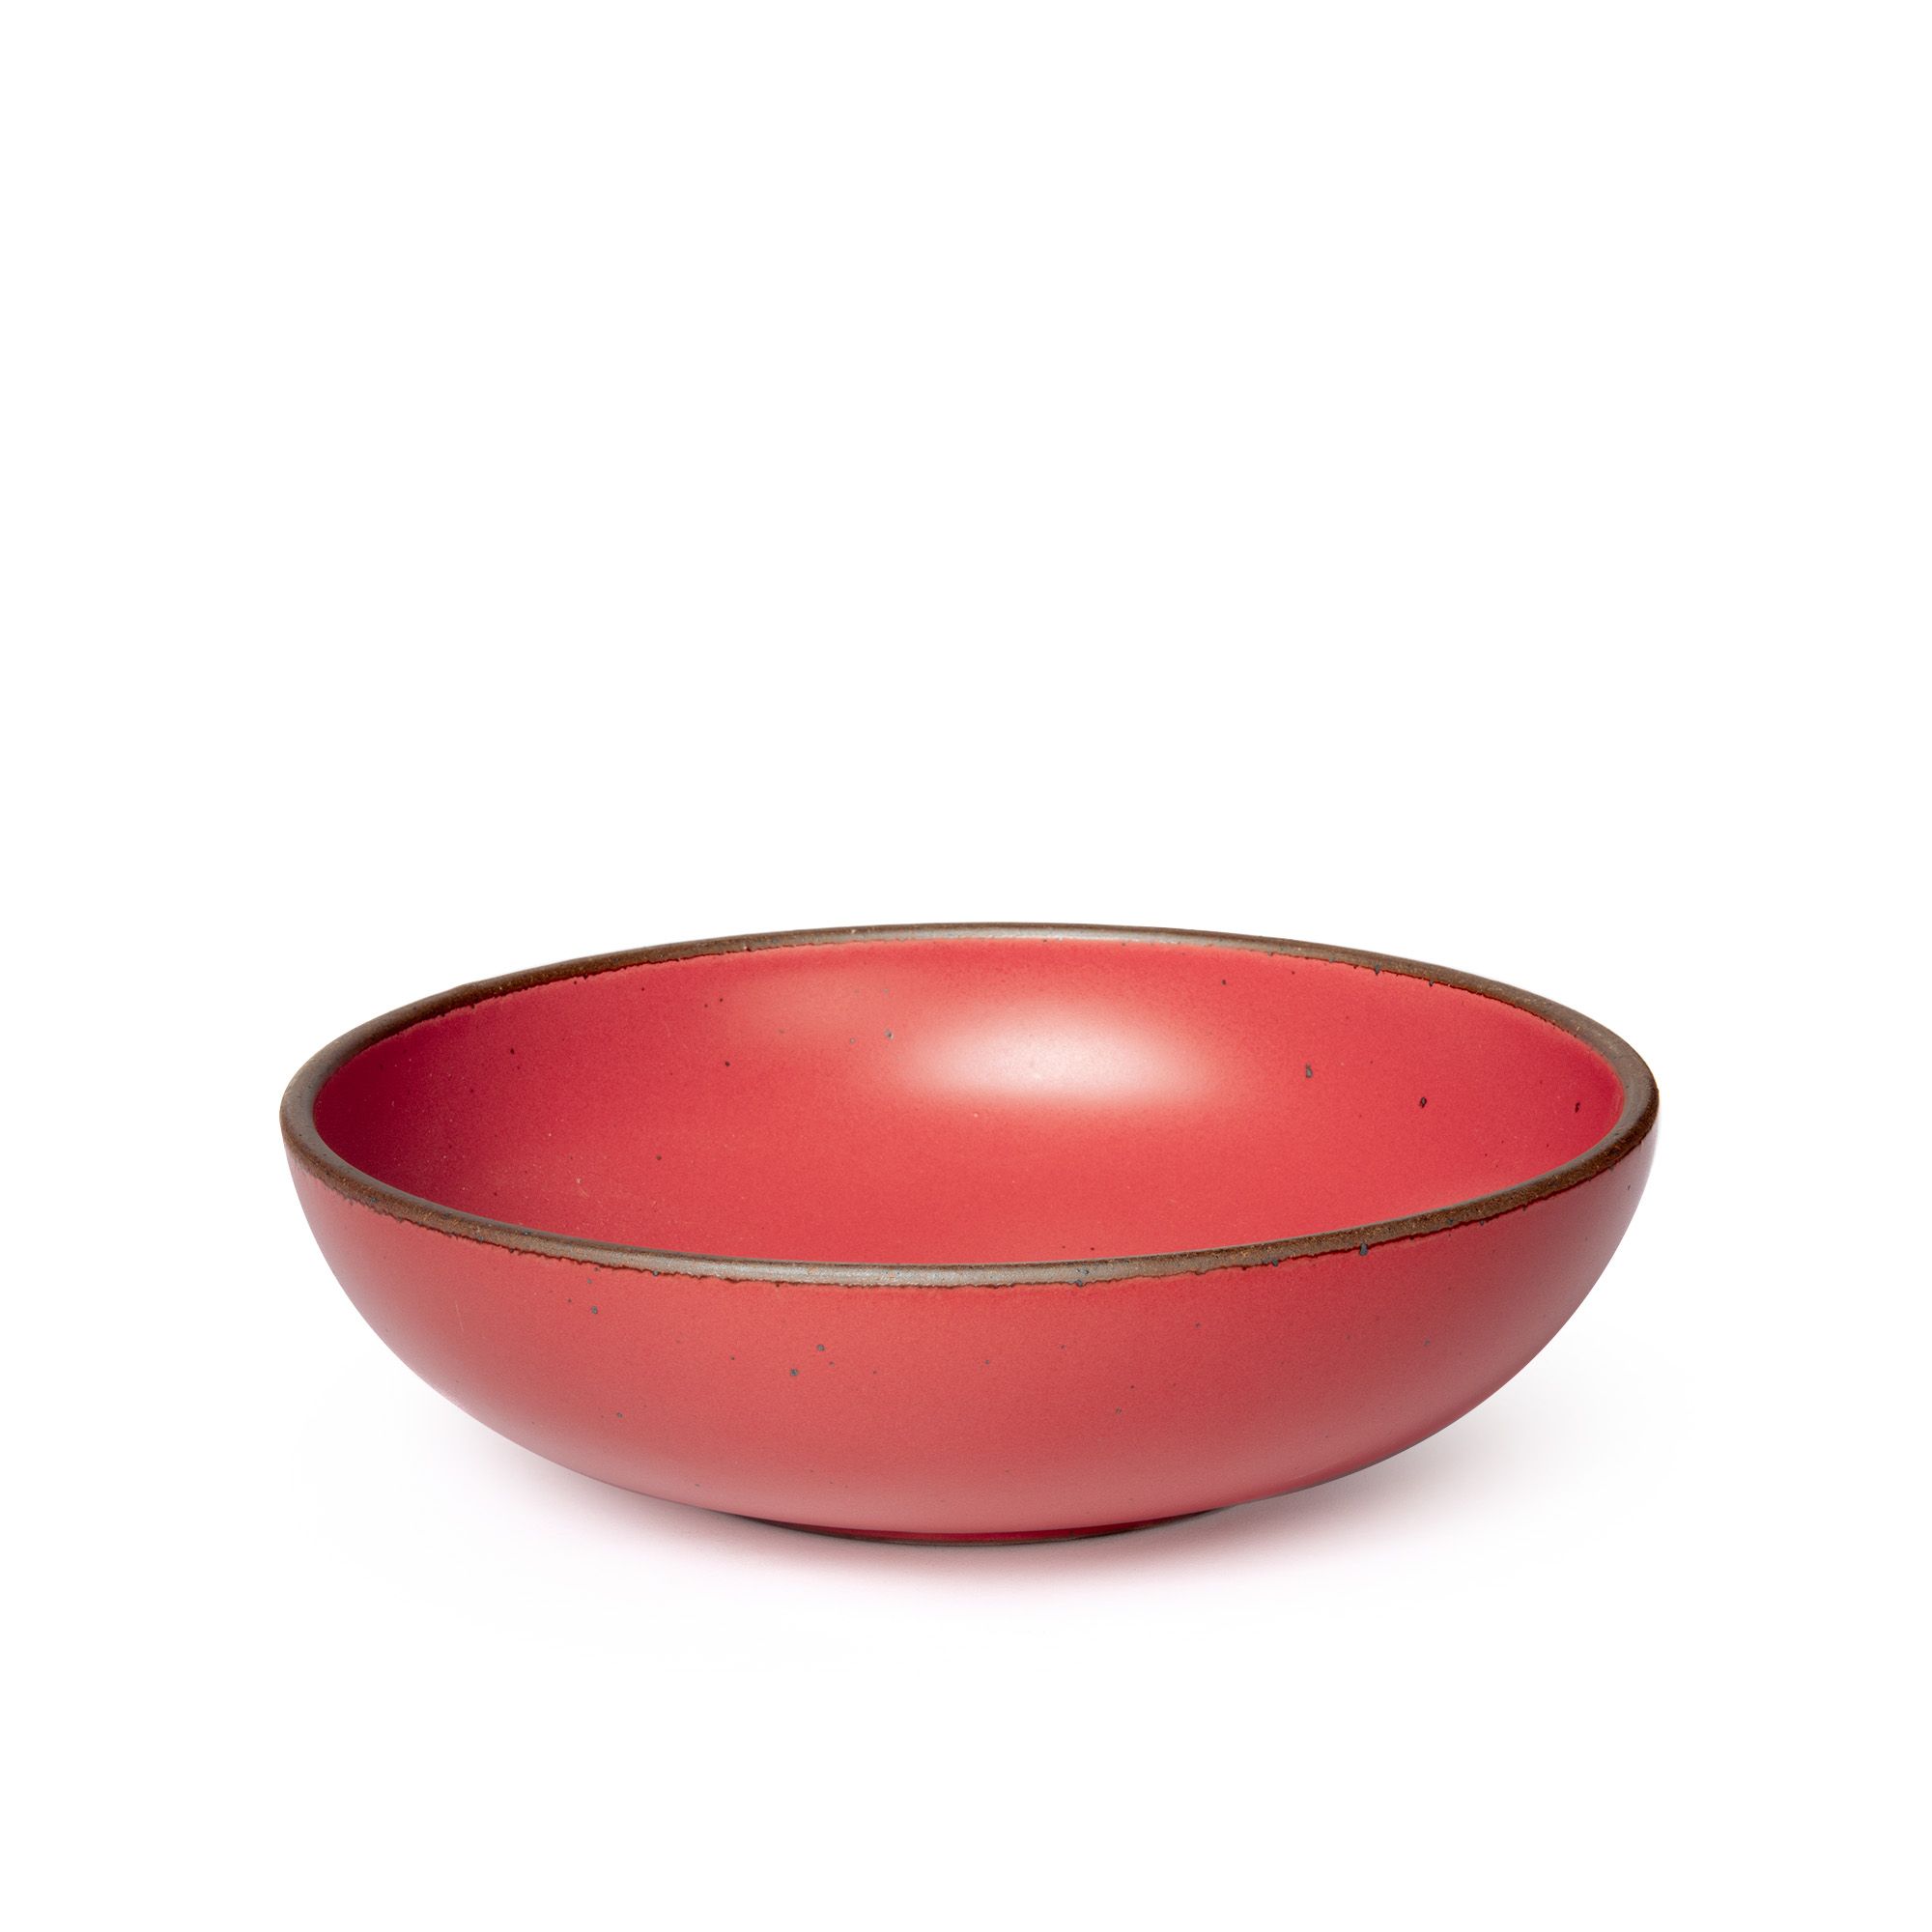 A large shallow serving ceramic bowl in a bold red color featuring iron speckles and an unglazed rim.